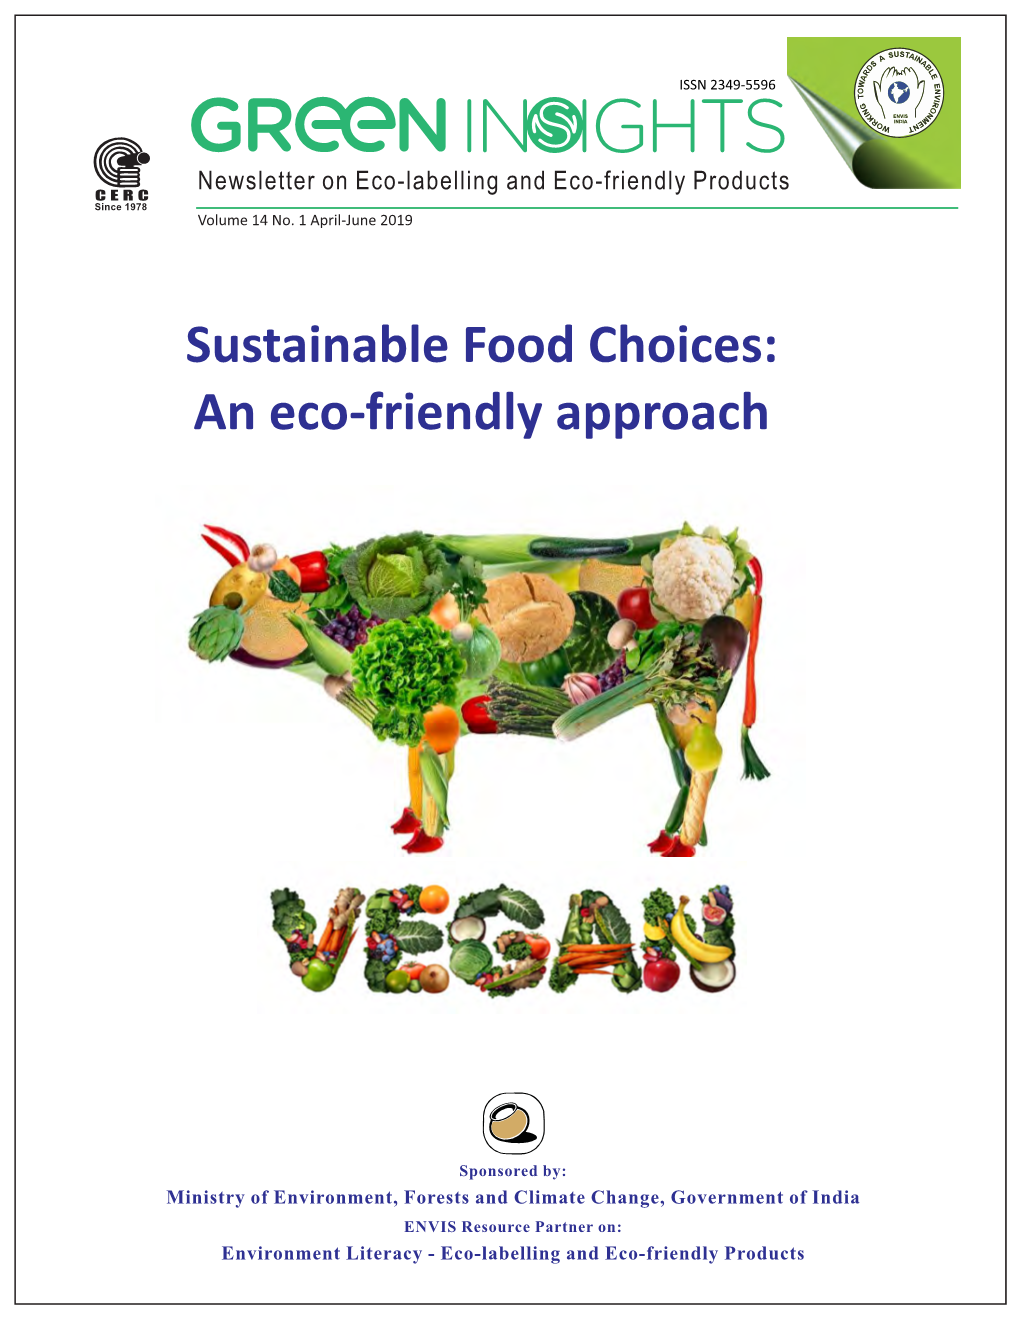 Sustainable Food Choices: an Eco-Friendly Approach